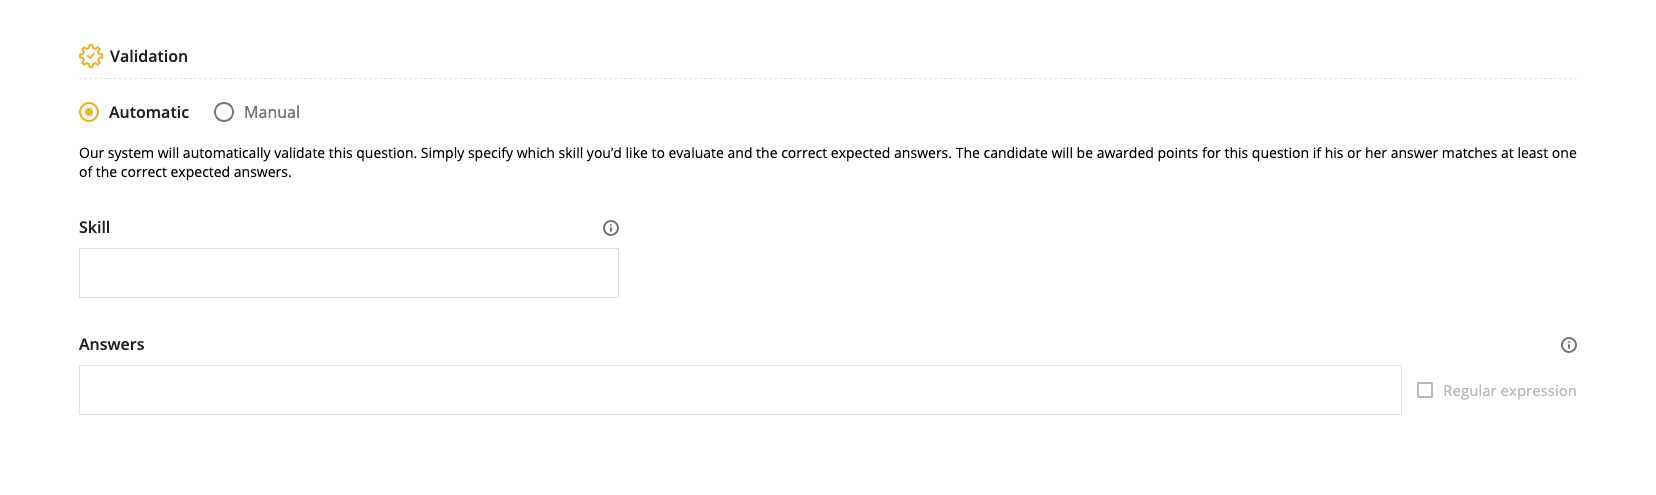 Validation section with "automatic" option selected and the skill and answers field empty.